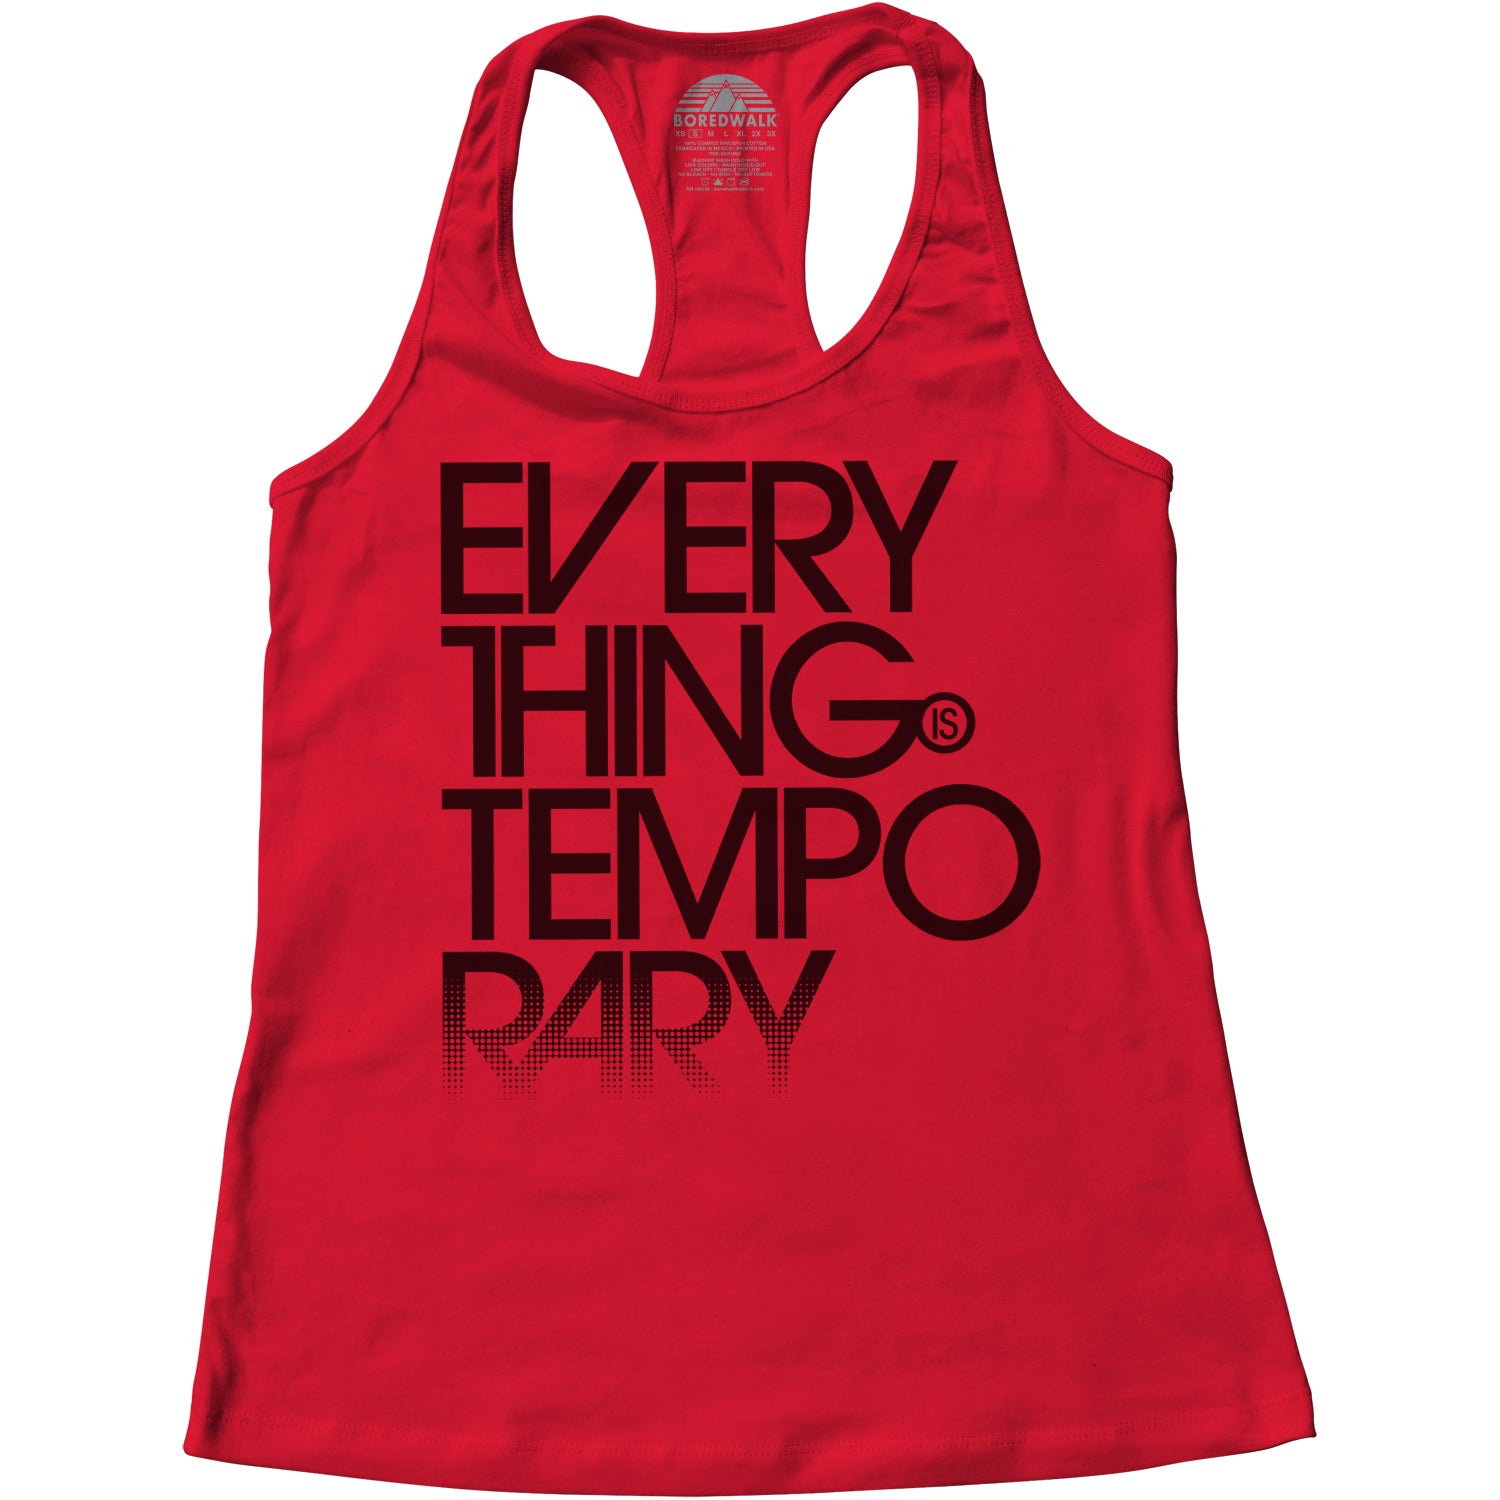 Women's Everything is Temporary Racerback Tank Top